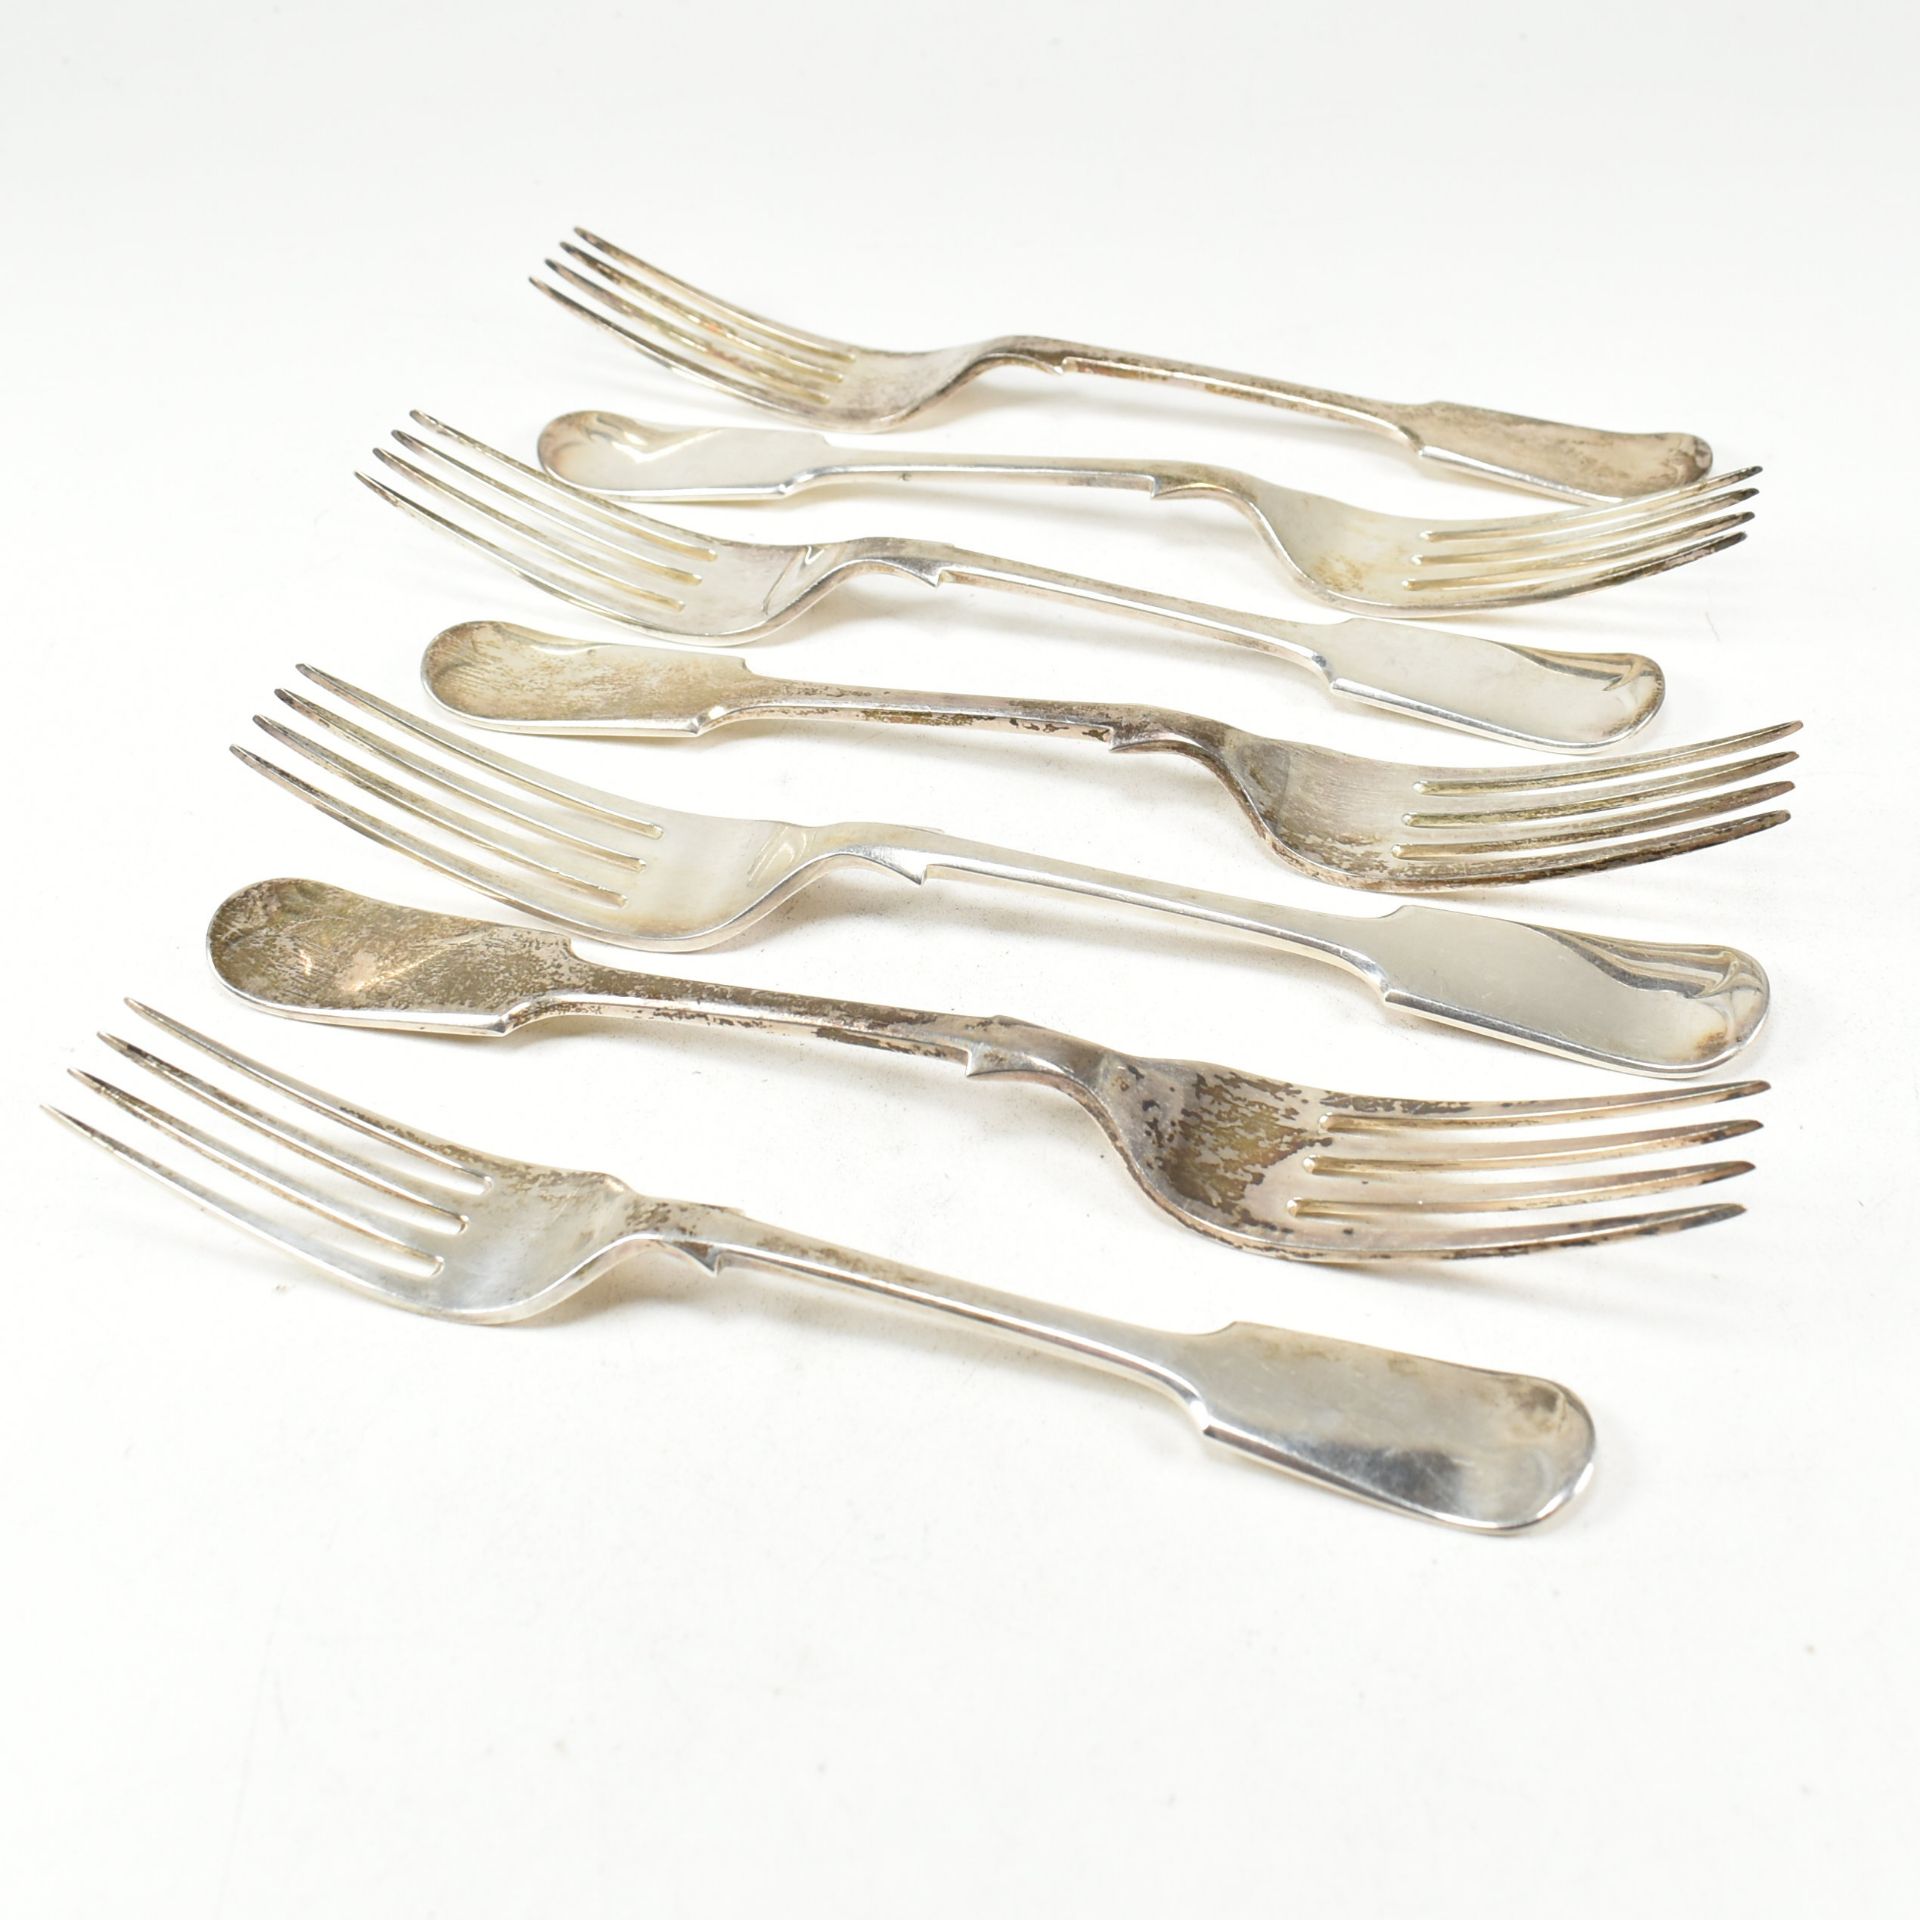 SET OF 7 EARLY 20TH CENTURY HALLMARKED SILVER FORKS - Image 2 of 4